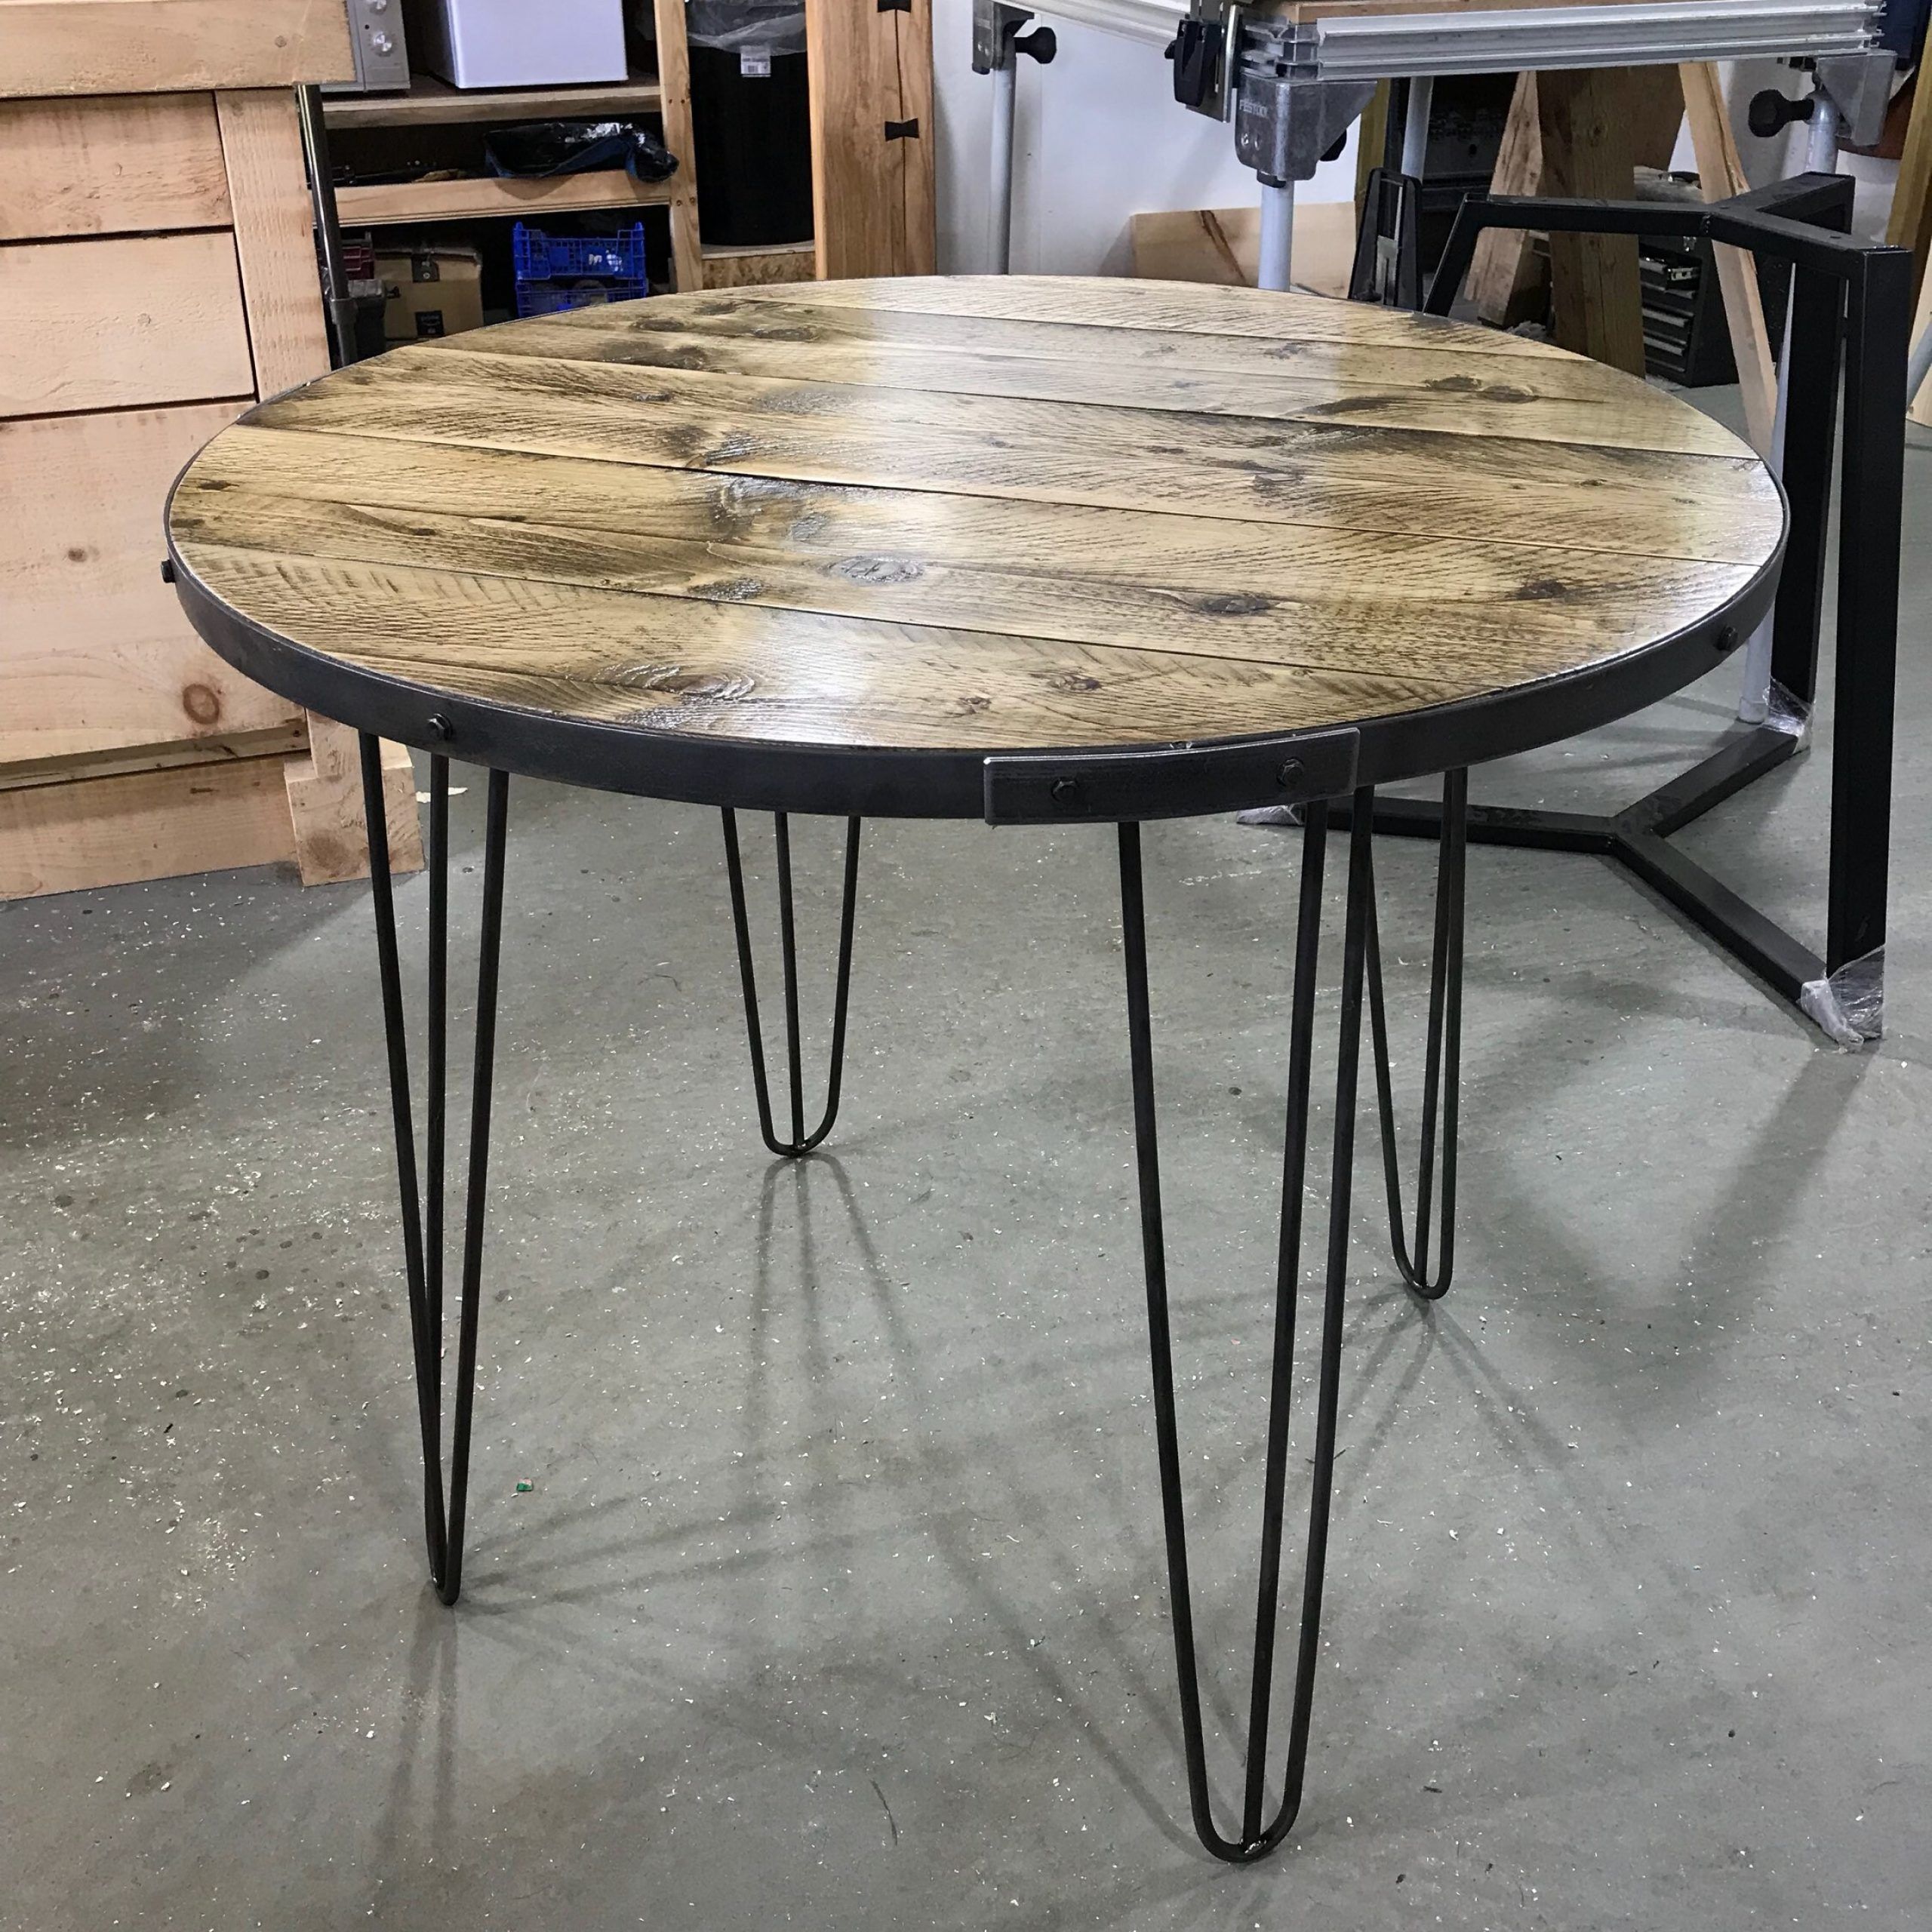 Vintage Industrial Style Dining Table – Hairpin Legs Throughout Most Recent Round Hairpin Leg Dining Tables (View 3 of 15)